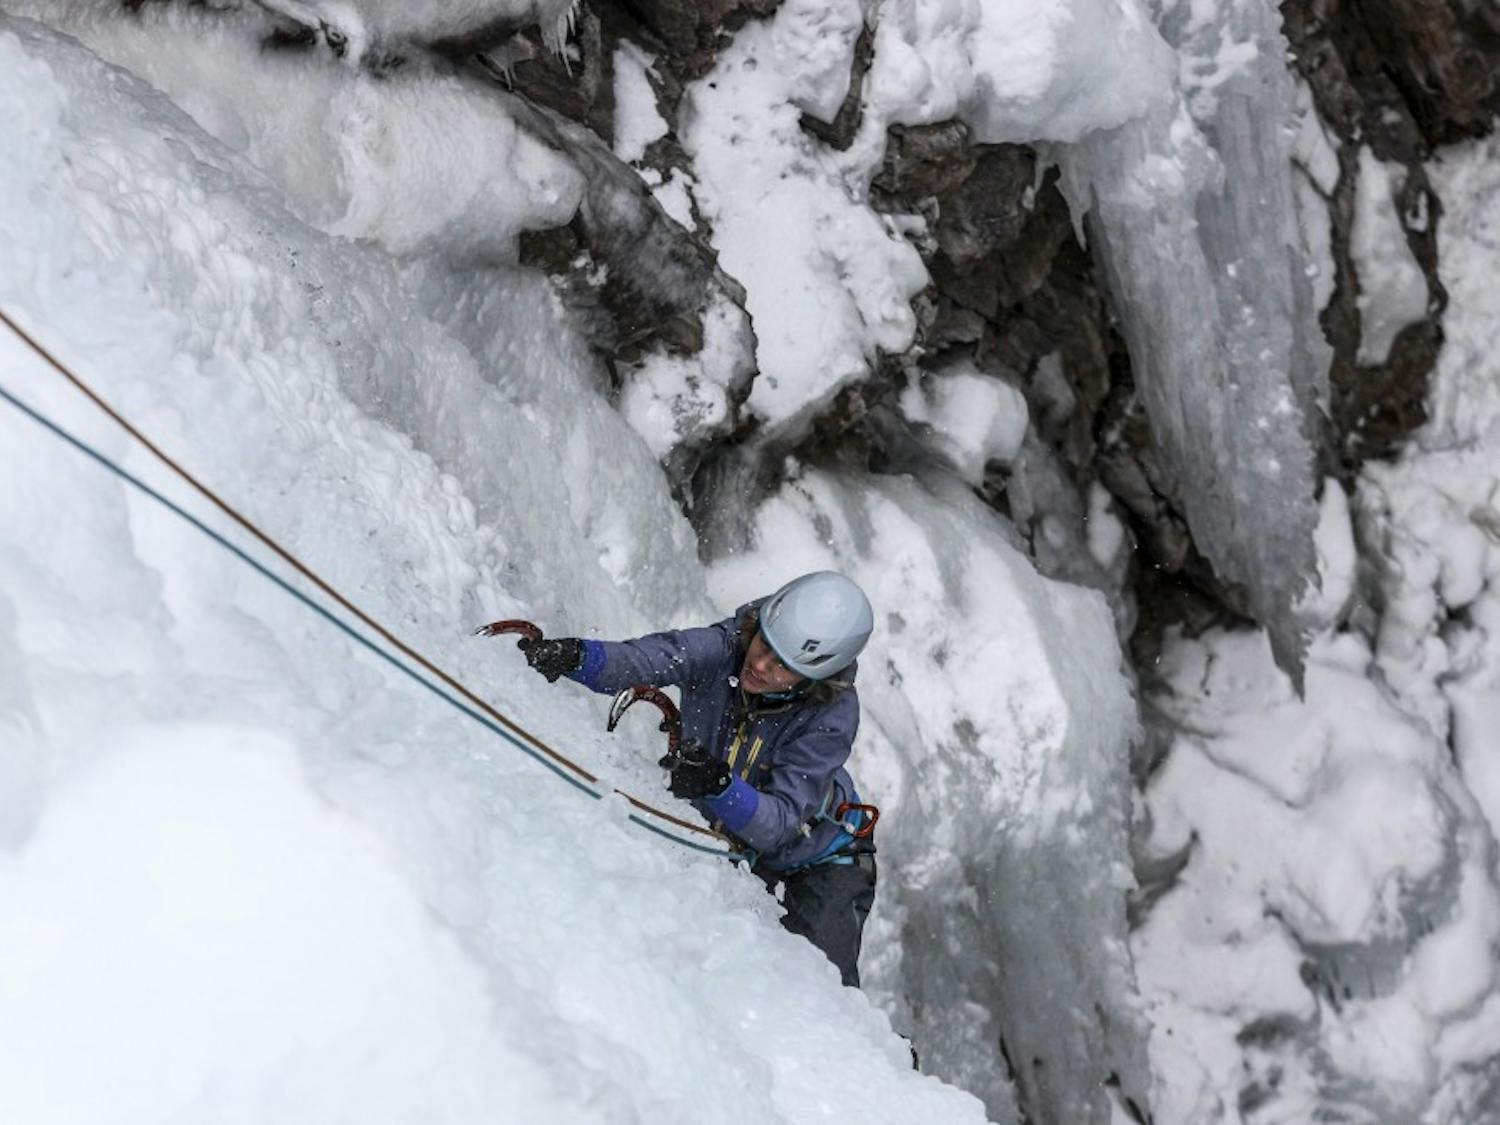 Every year Ouray Colorado, popularly known as the Switzerland of America, holds the world’s largest gathering of ice climbers. This year’s 2018 Ouray Ice Festival was held from Jan. 18 through 21.